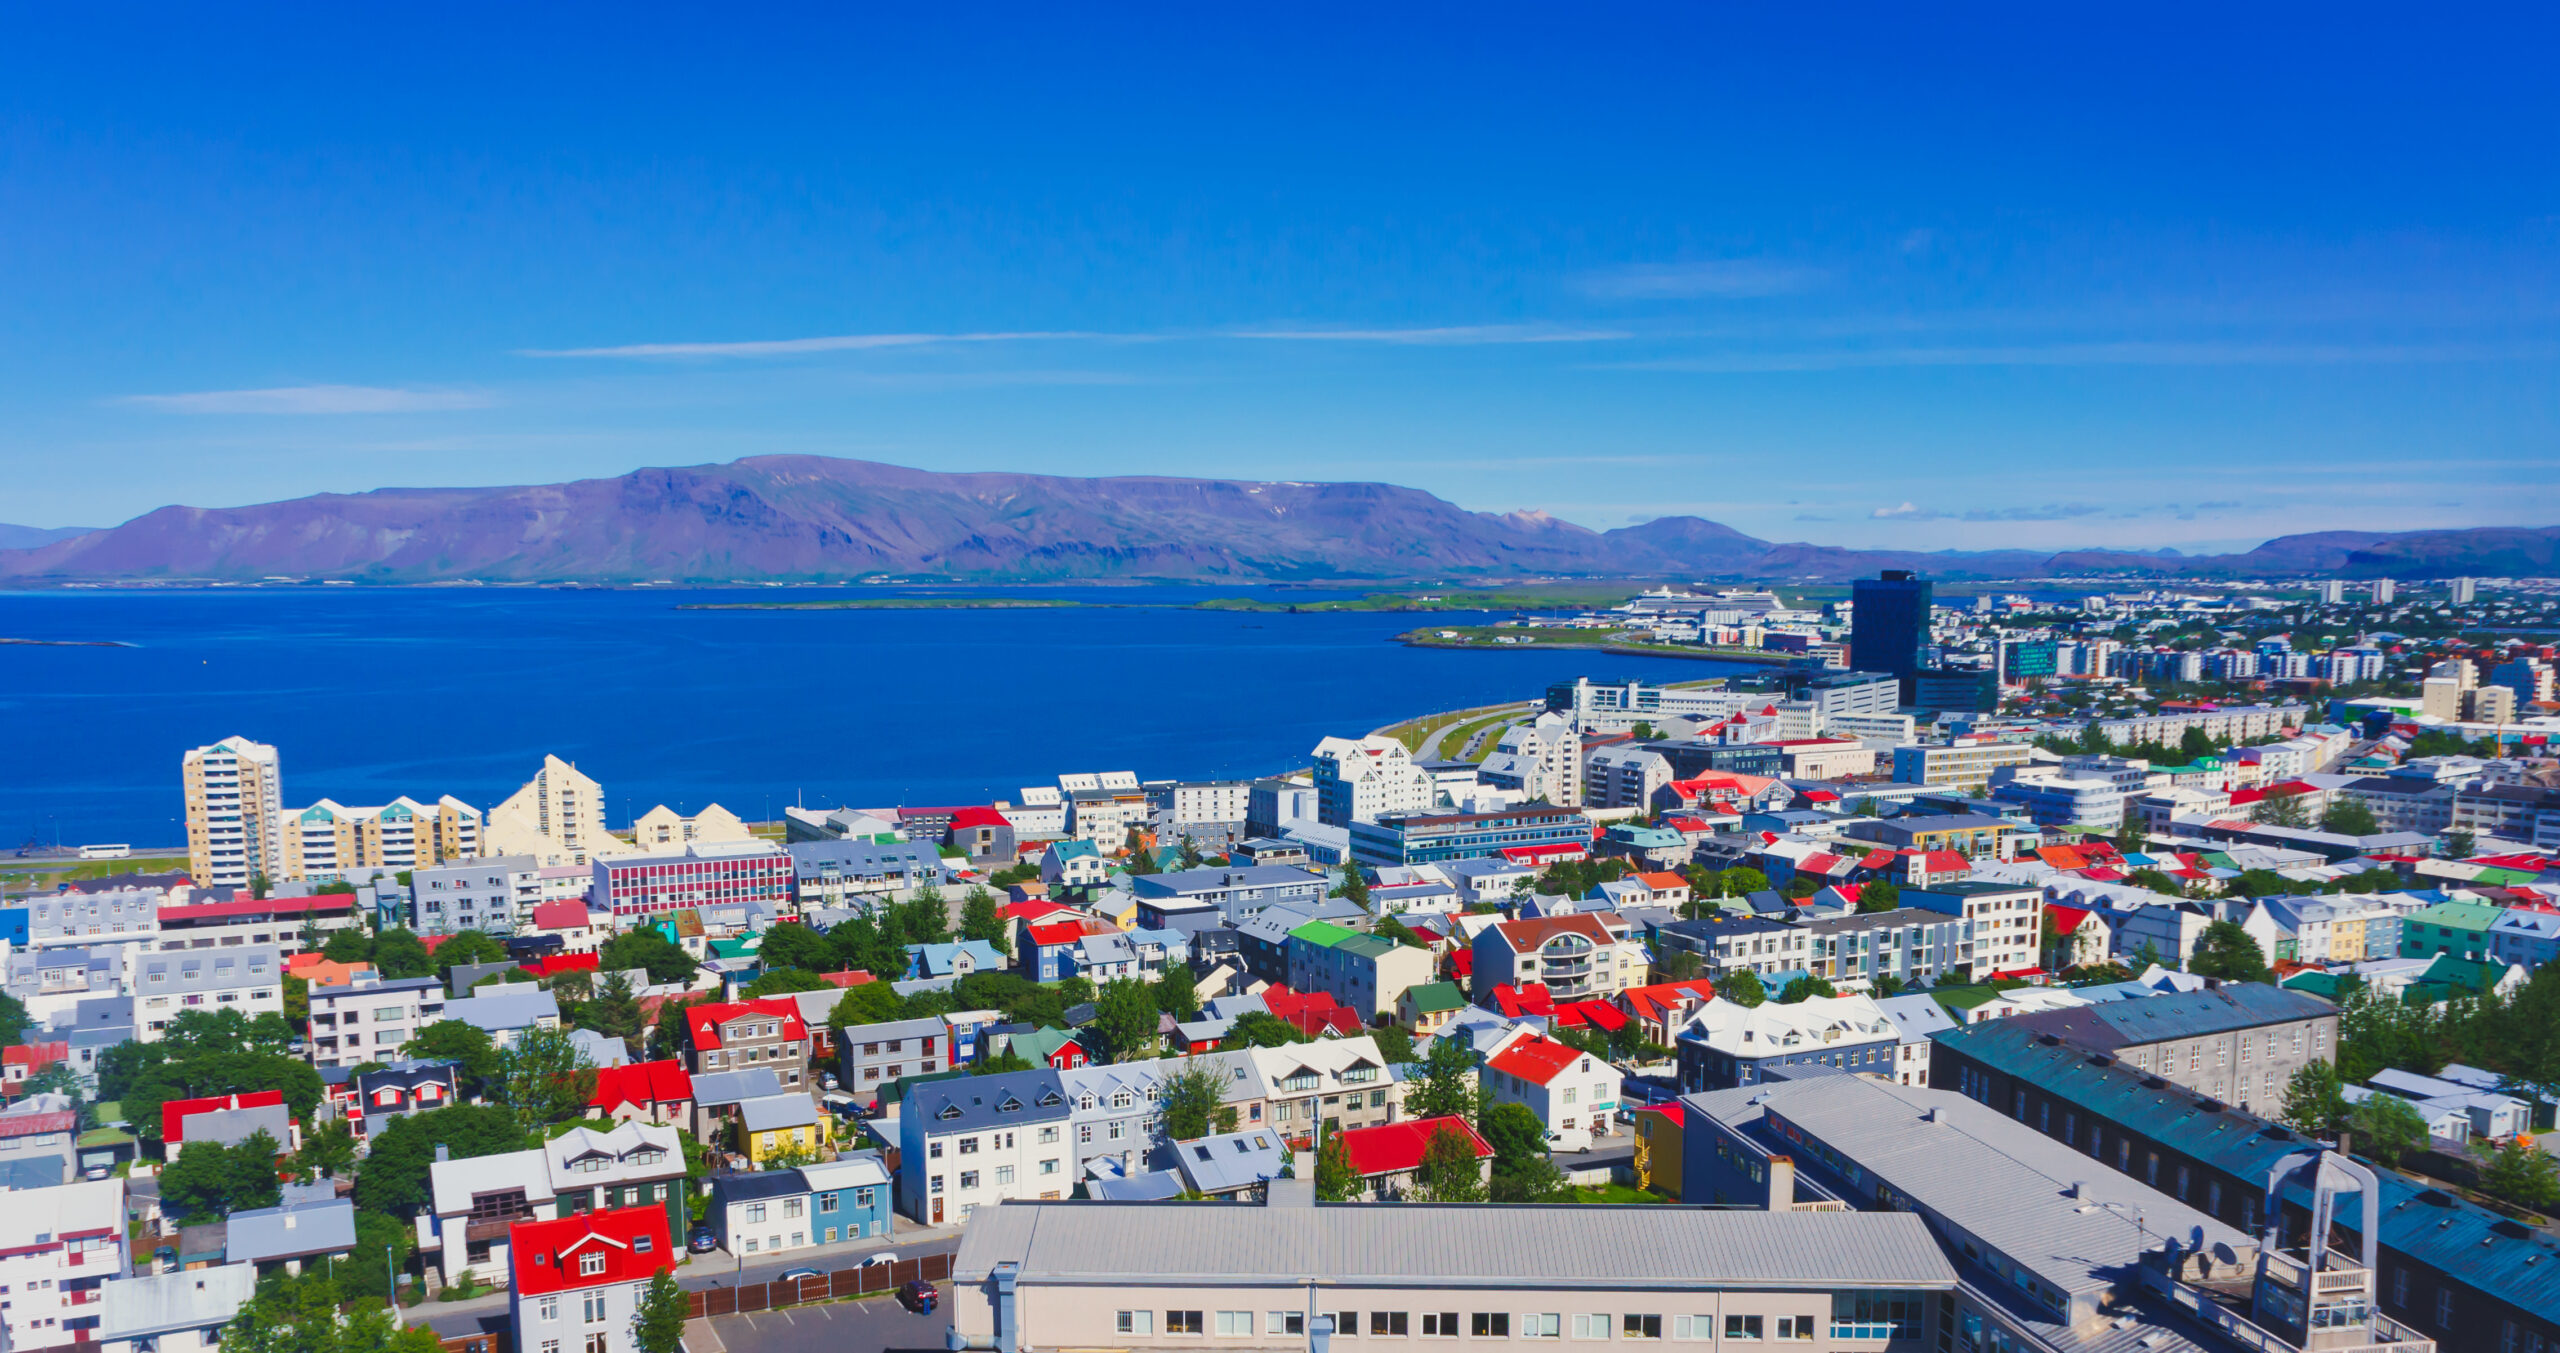 Aerial View Of Reykjavik, Iceland | The Best European Summer Destinations to Add to Your Bucket List